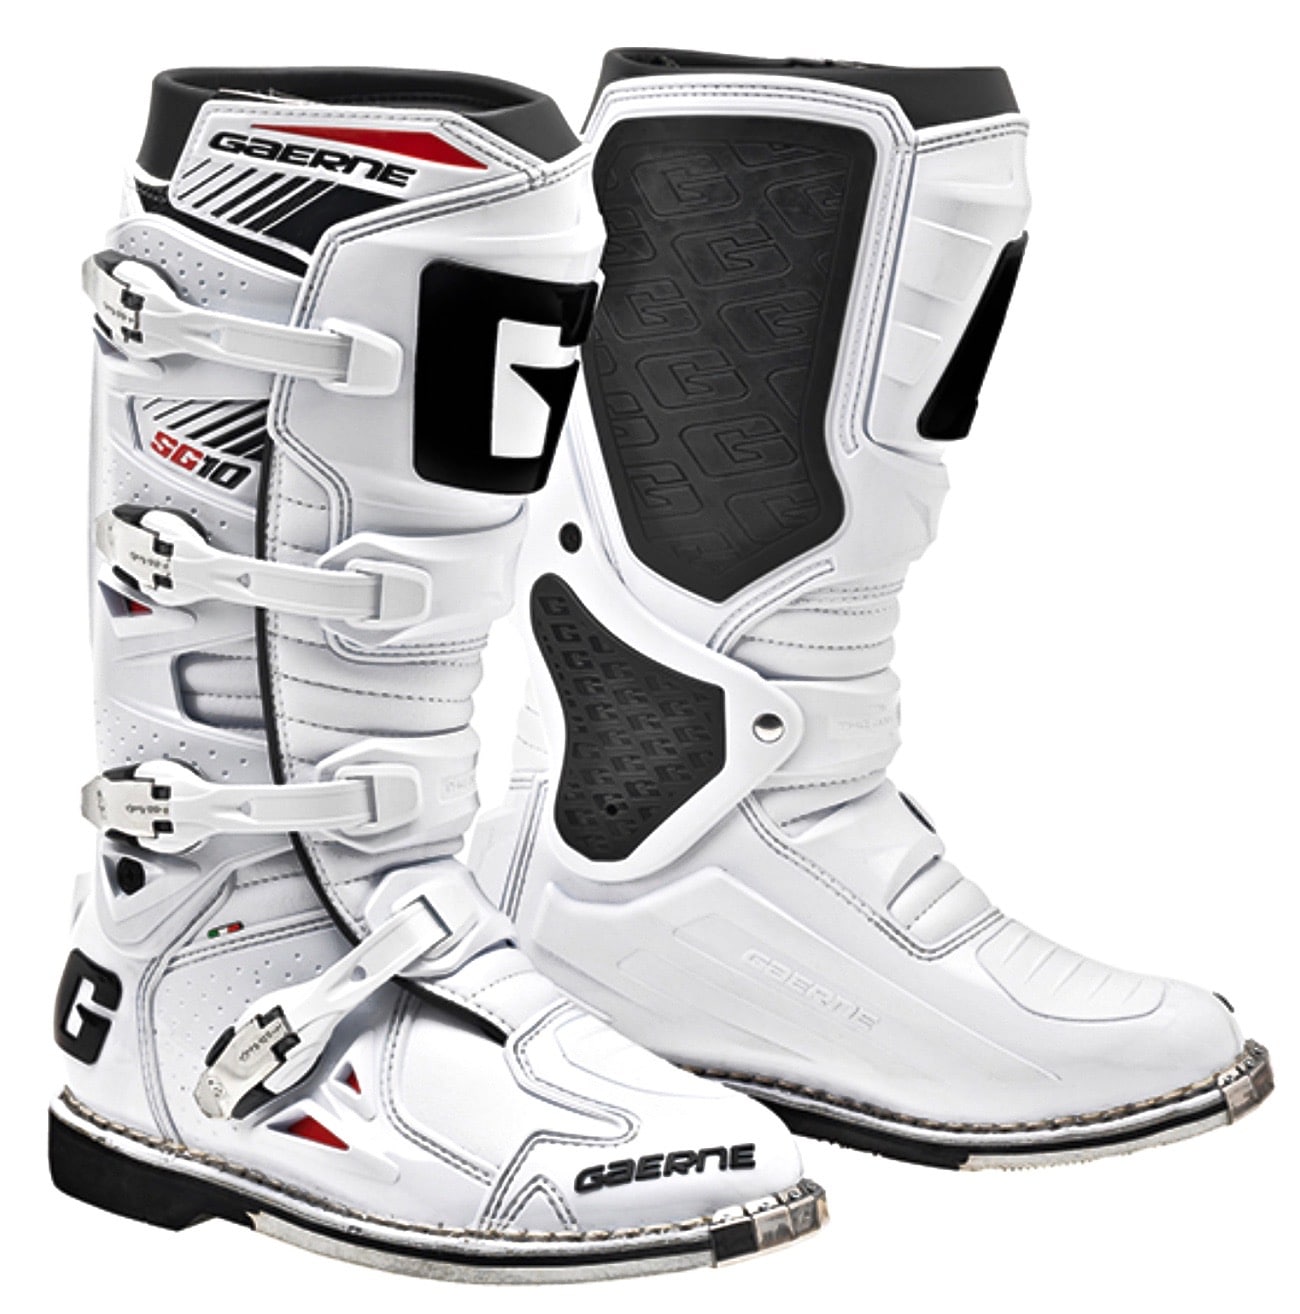 Gaerne SG10 MX Racing Boot Blemished Red/White/Blue 